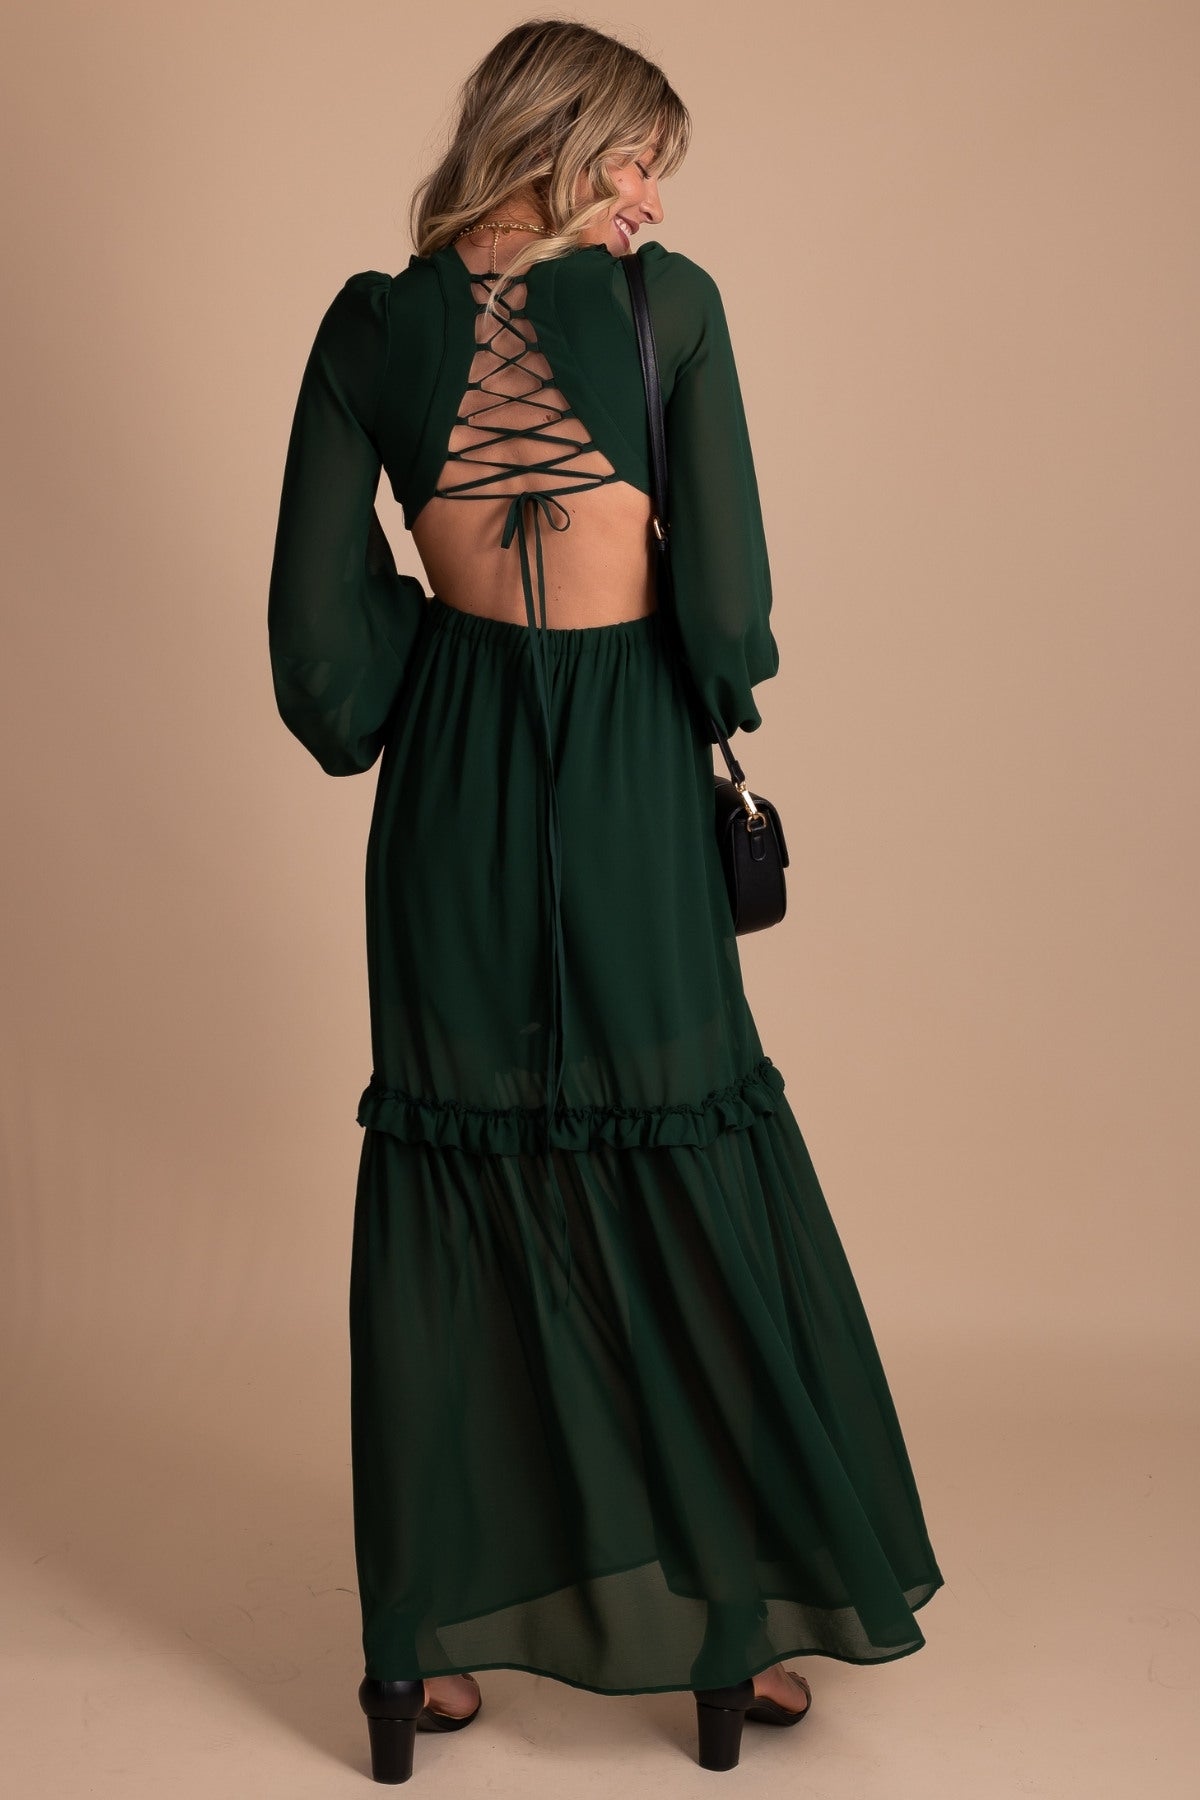 Women's Maxi Dress in Dark Green with Lace Up Open Back